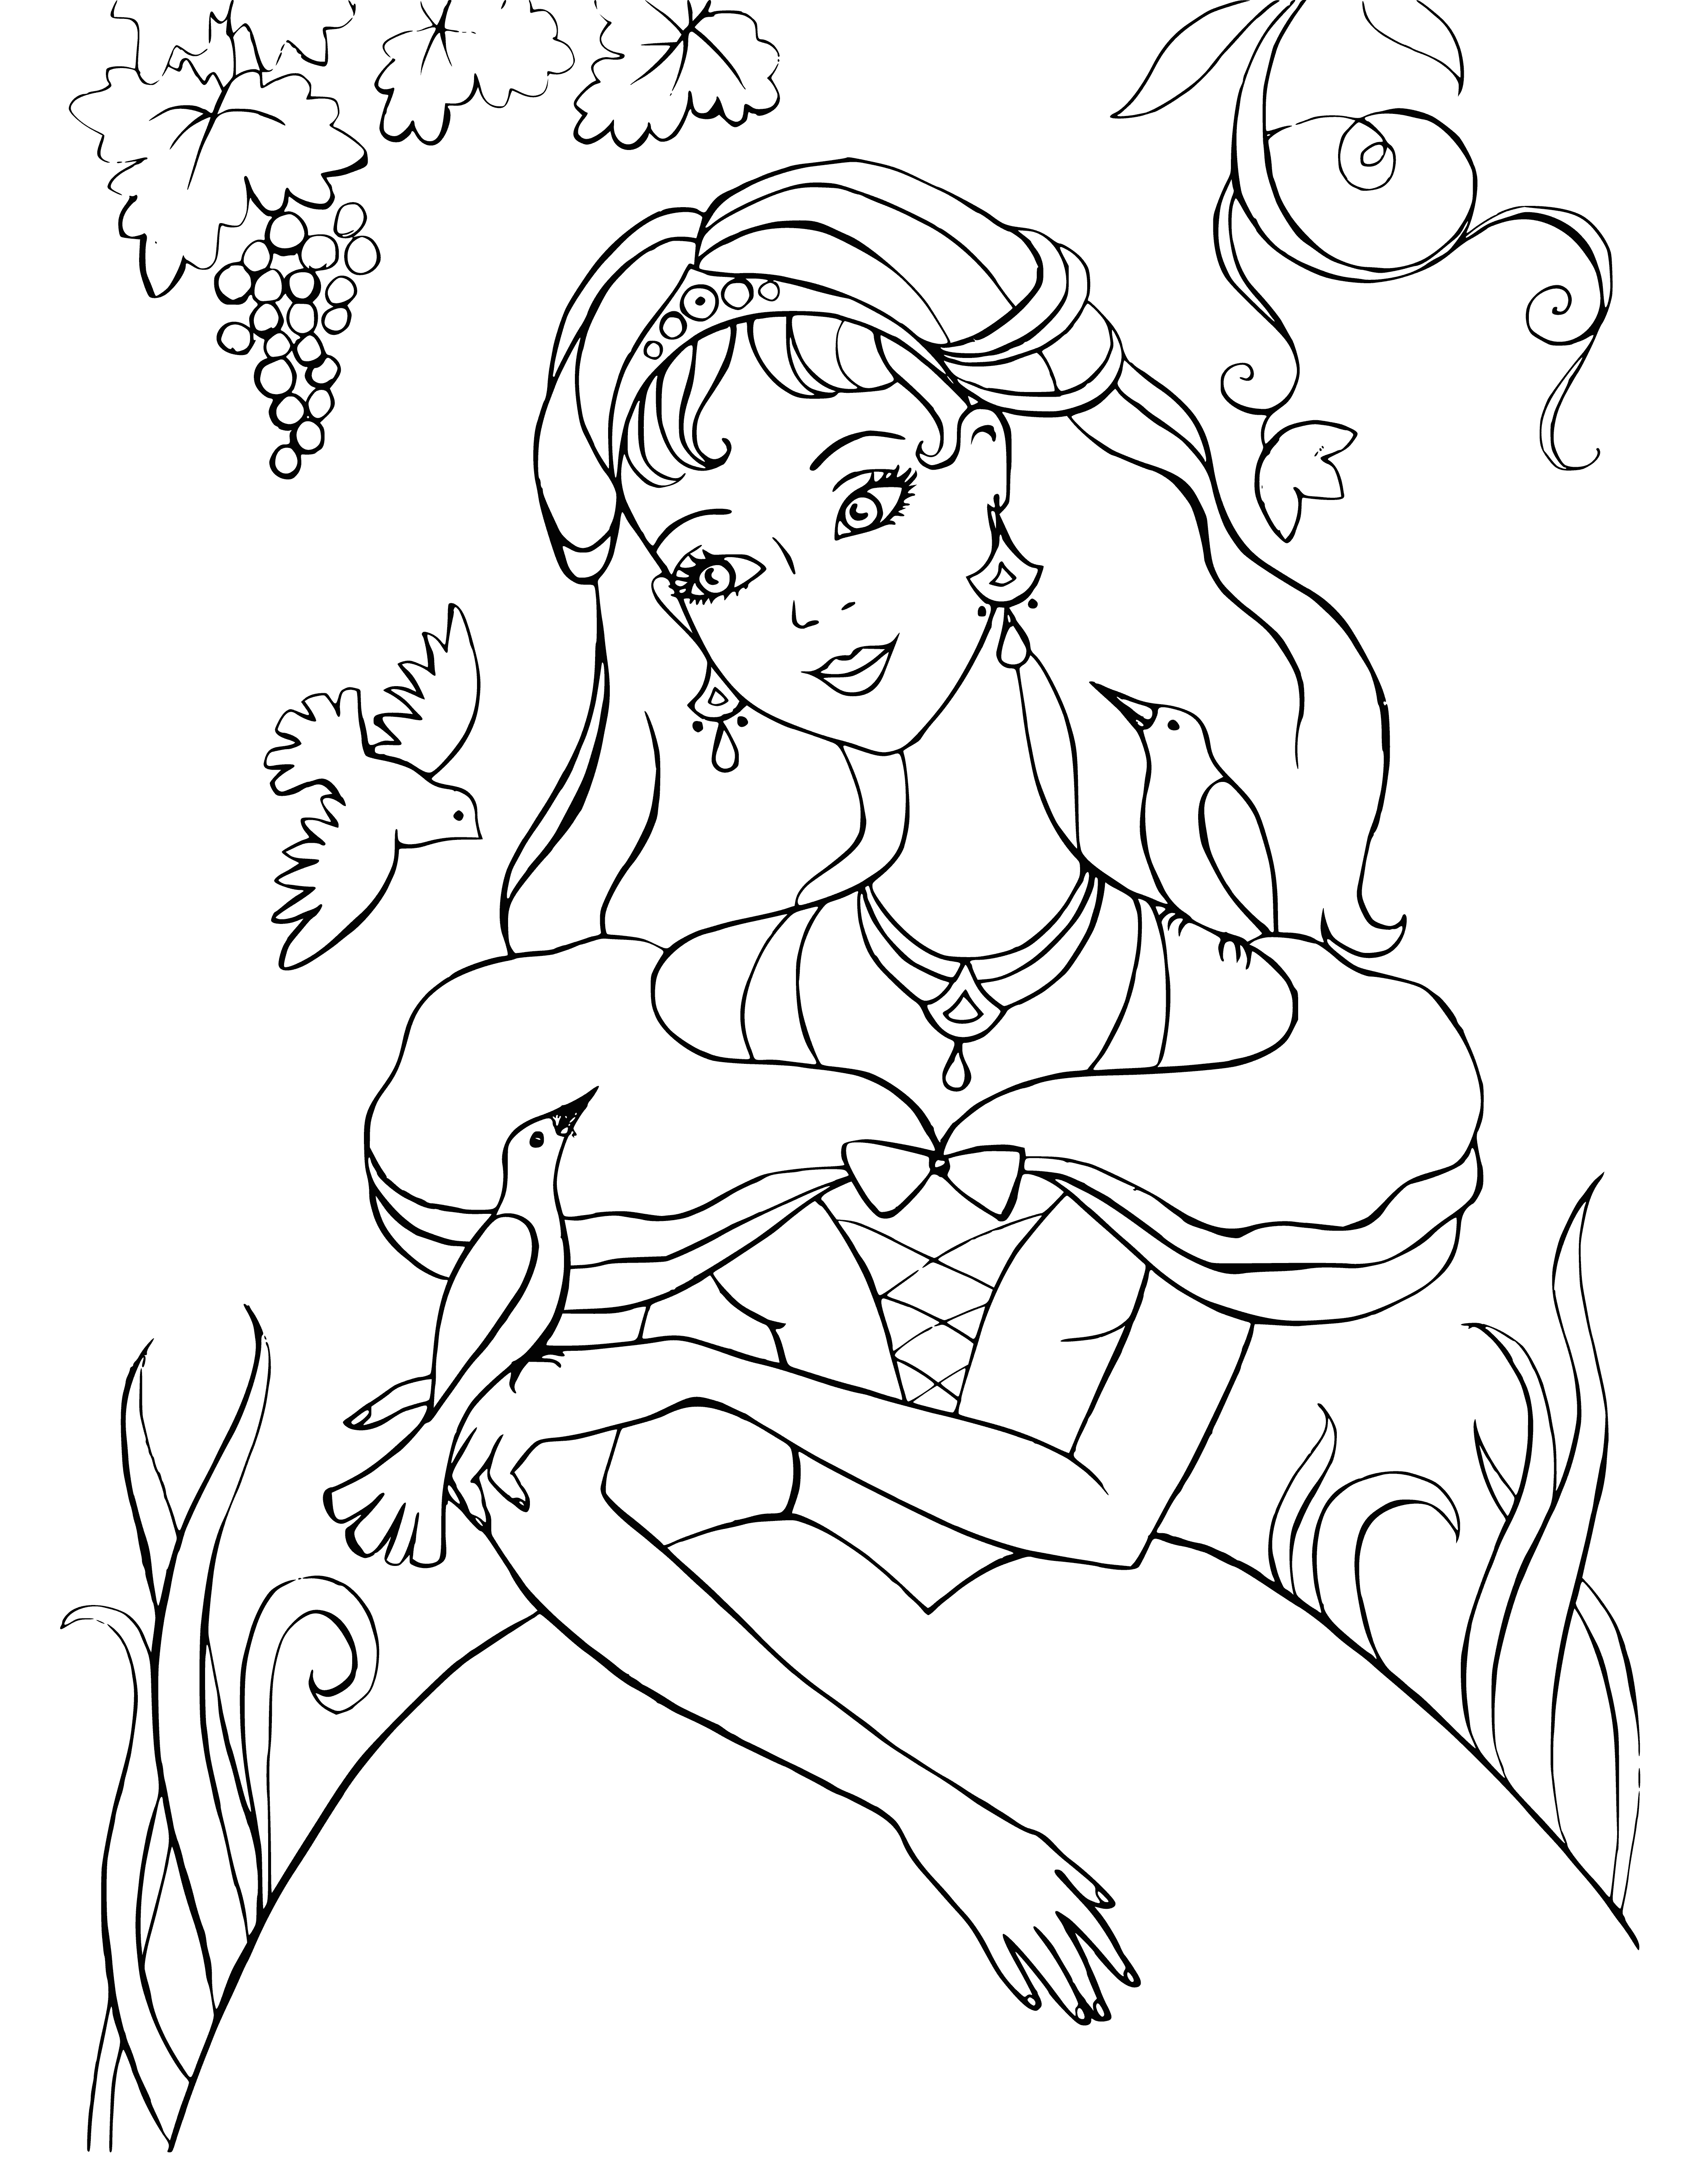 Princess in the garden coloring page